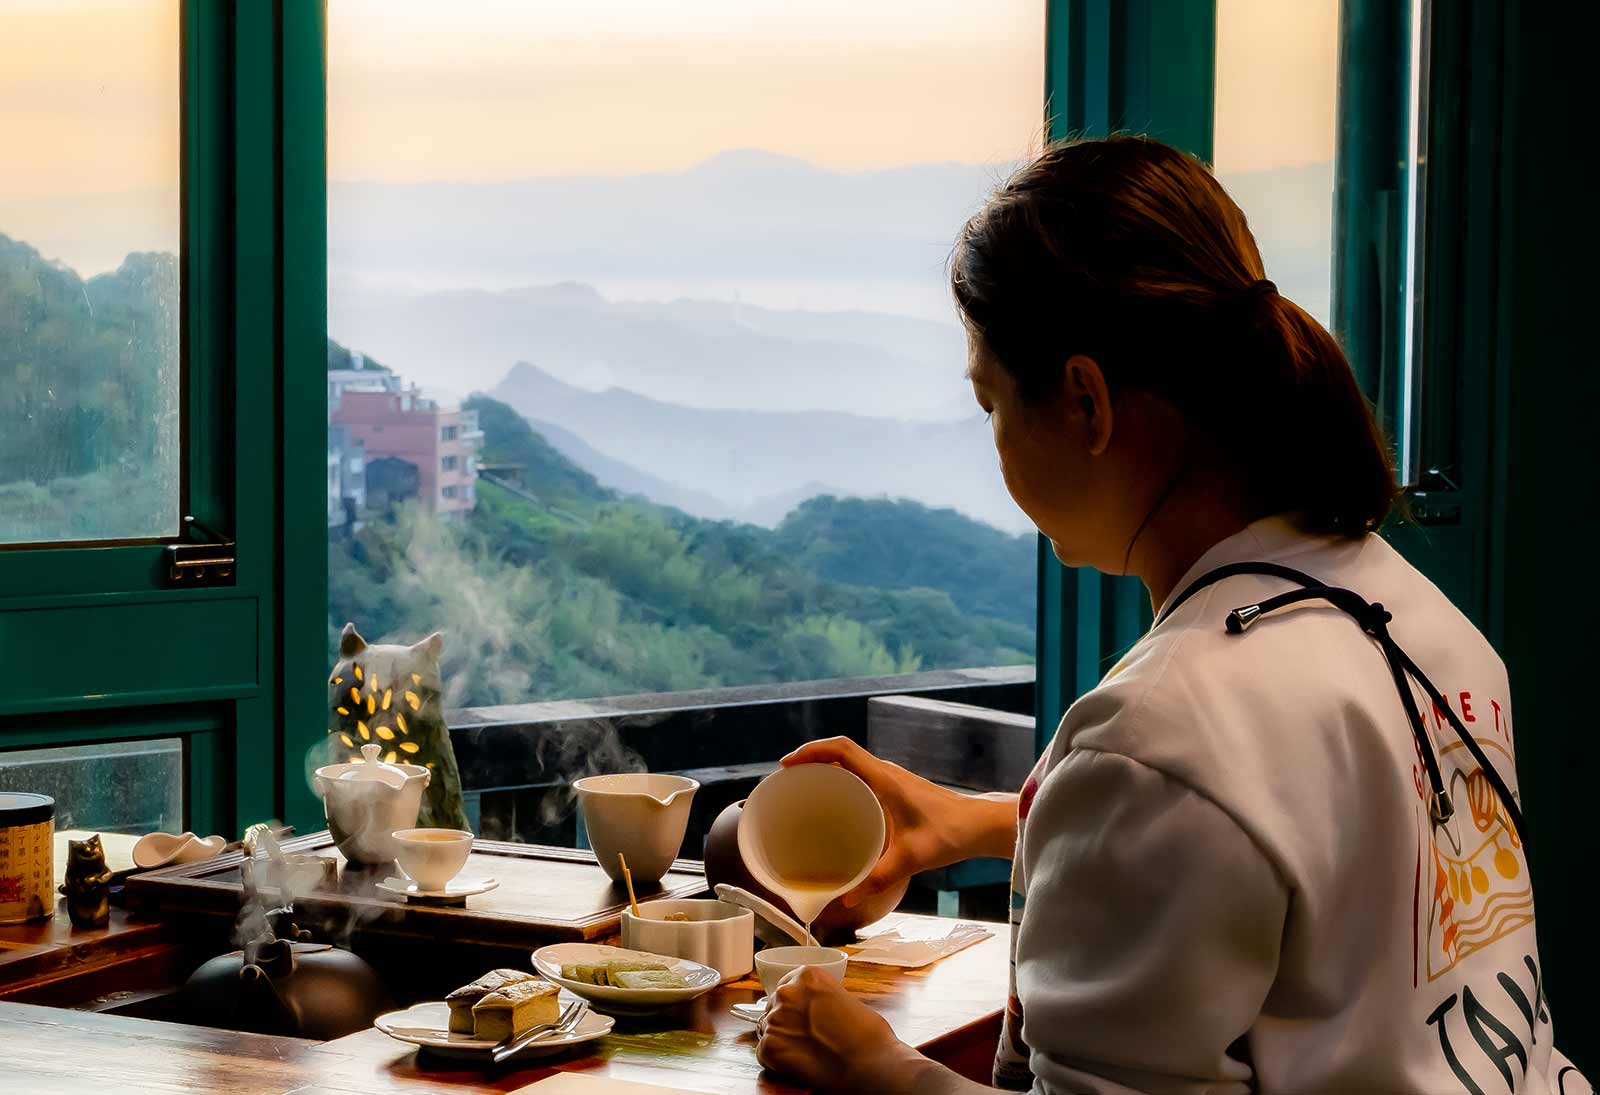 A guest makes tea in Jiufen Tea House with layers of mountains visible through the open window.